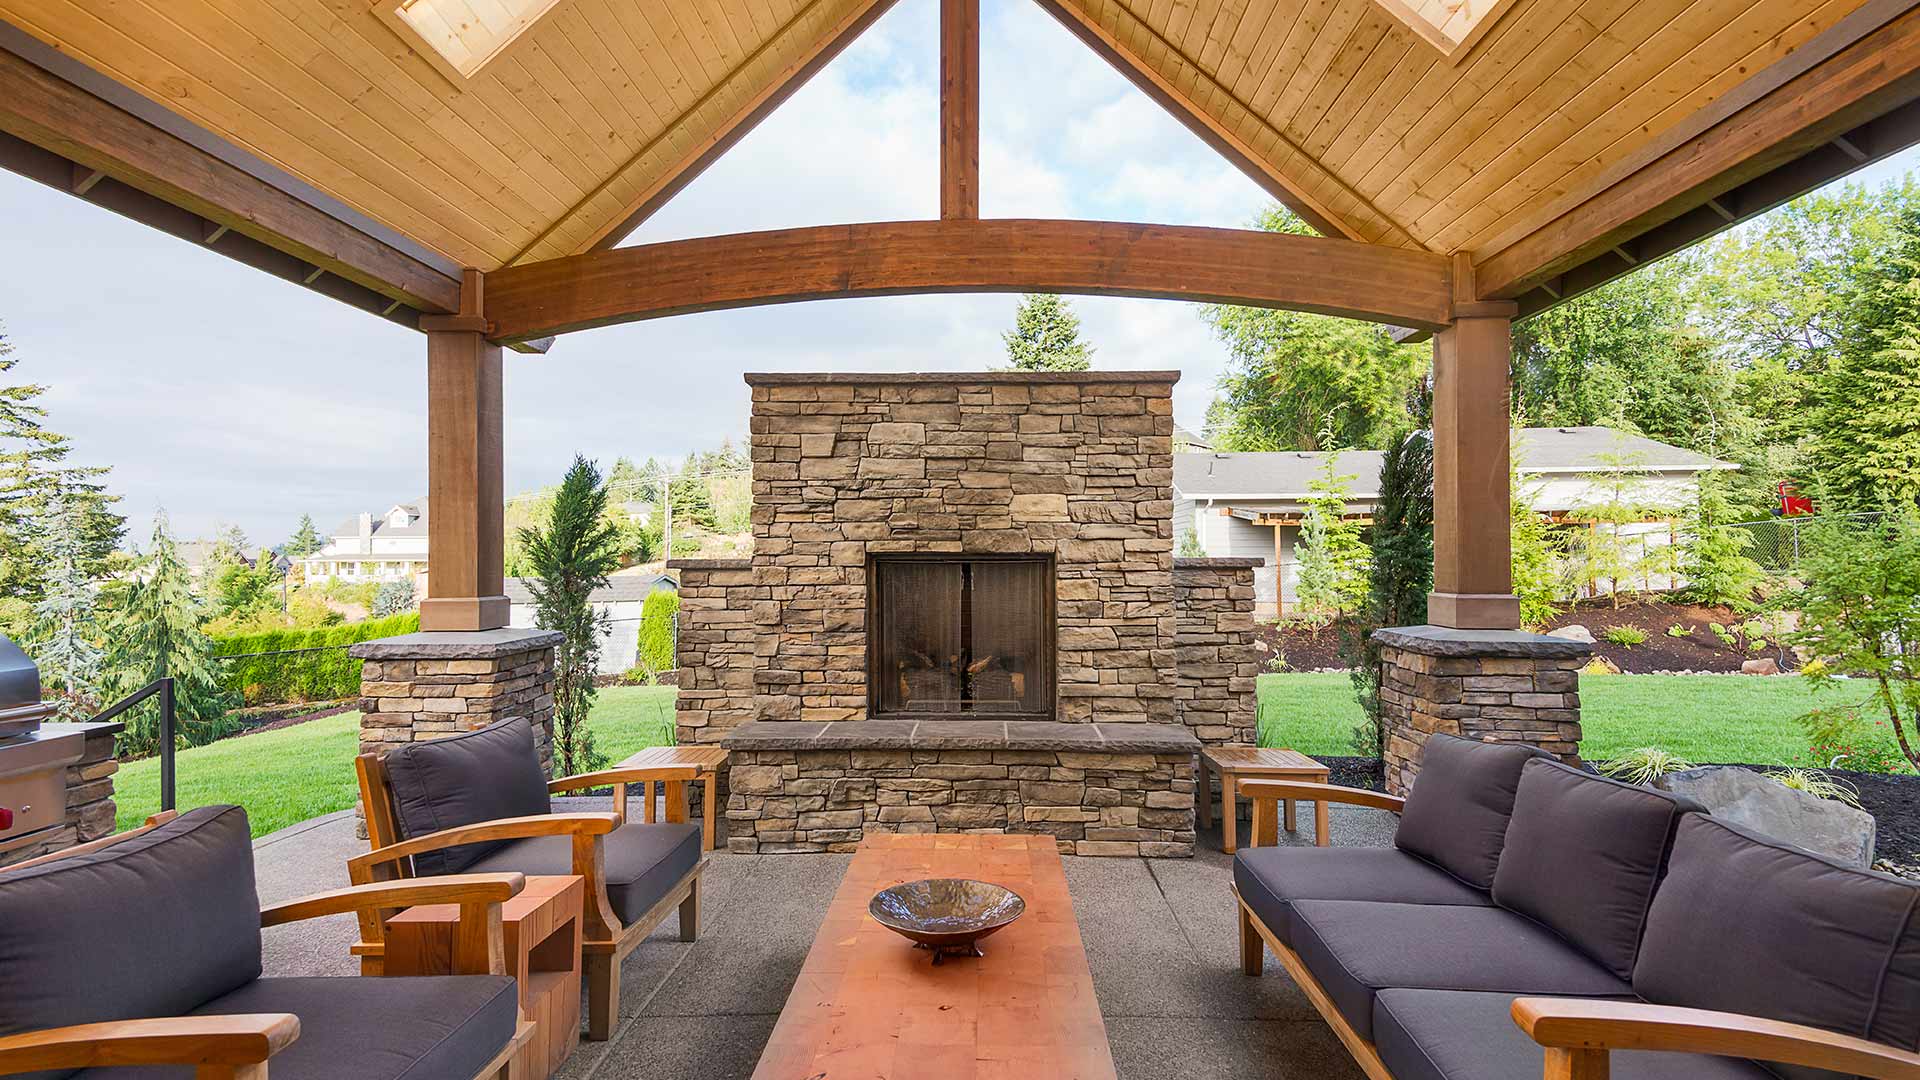 An Outdoor Fireplace Can Increase the Beauty & Value of Your Property